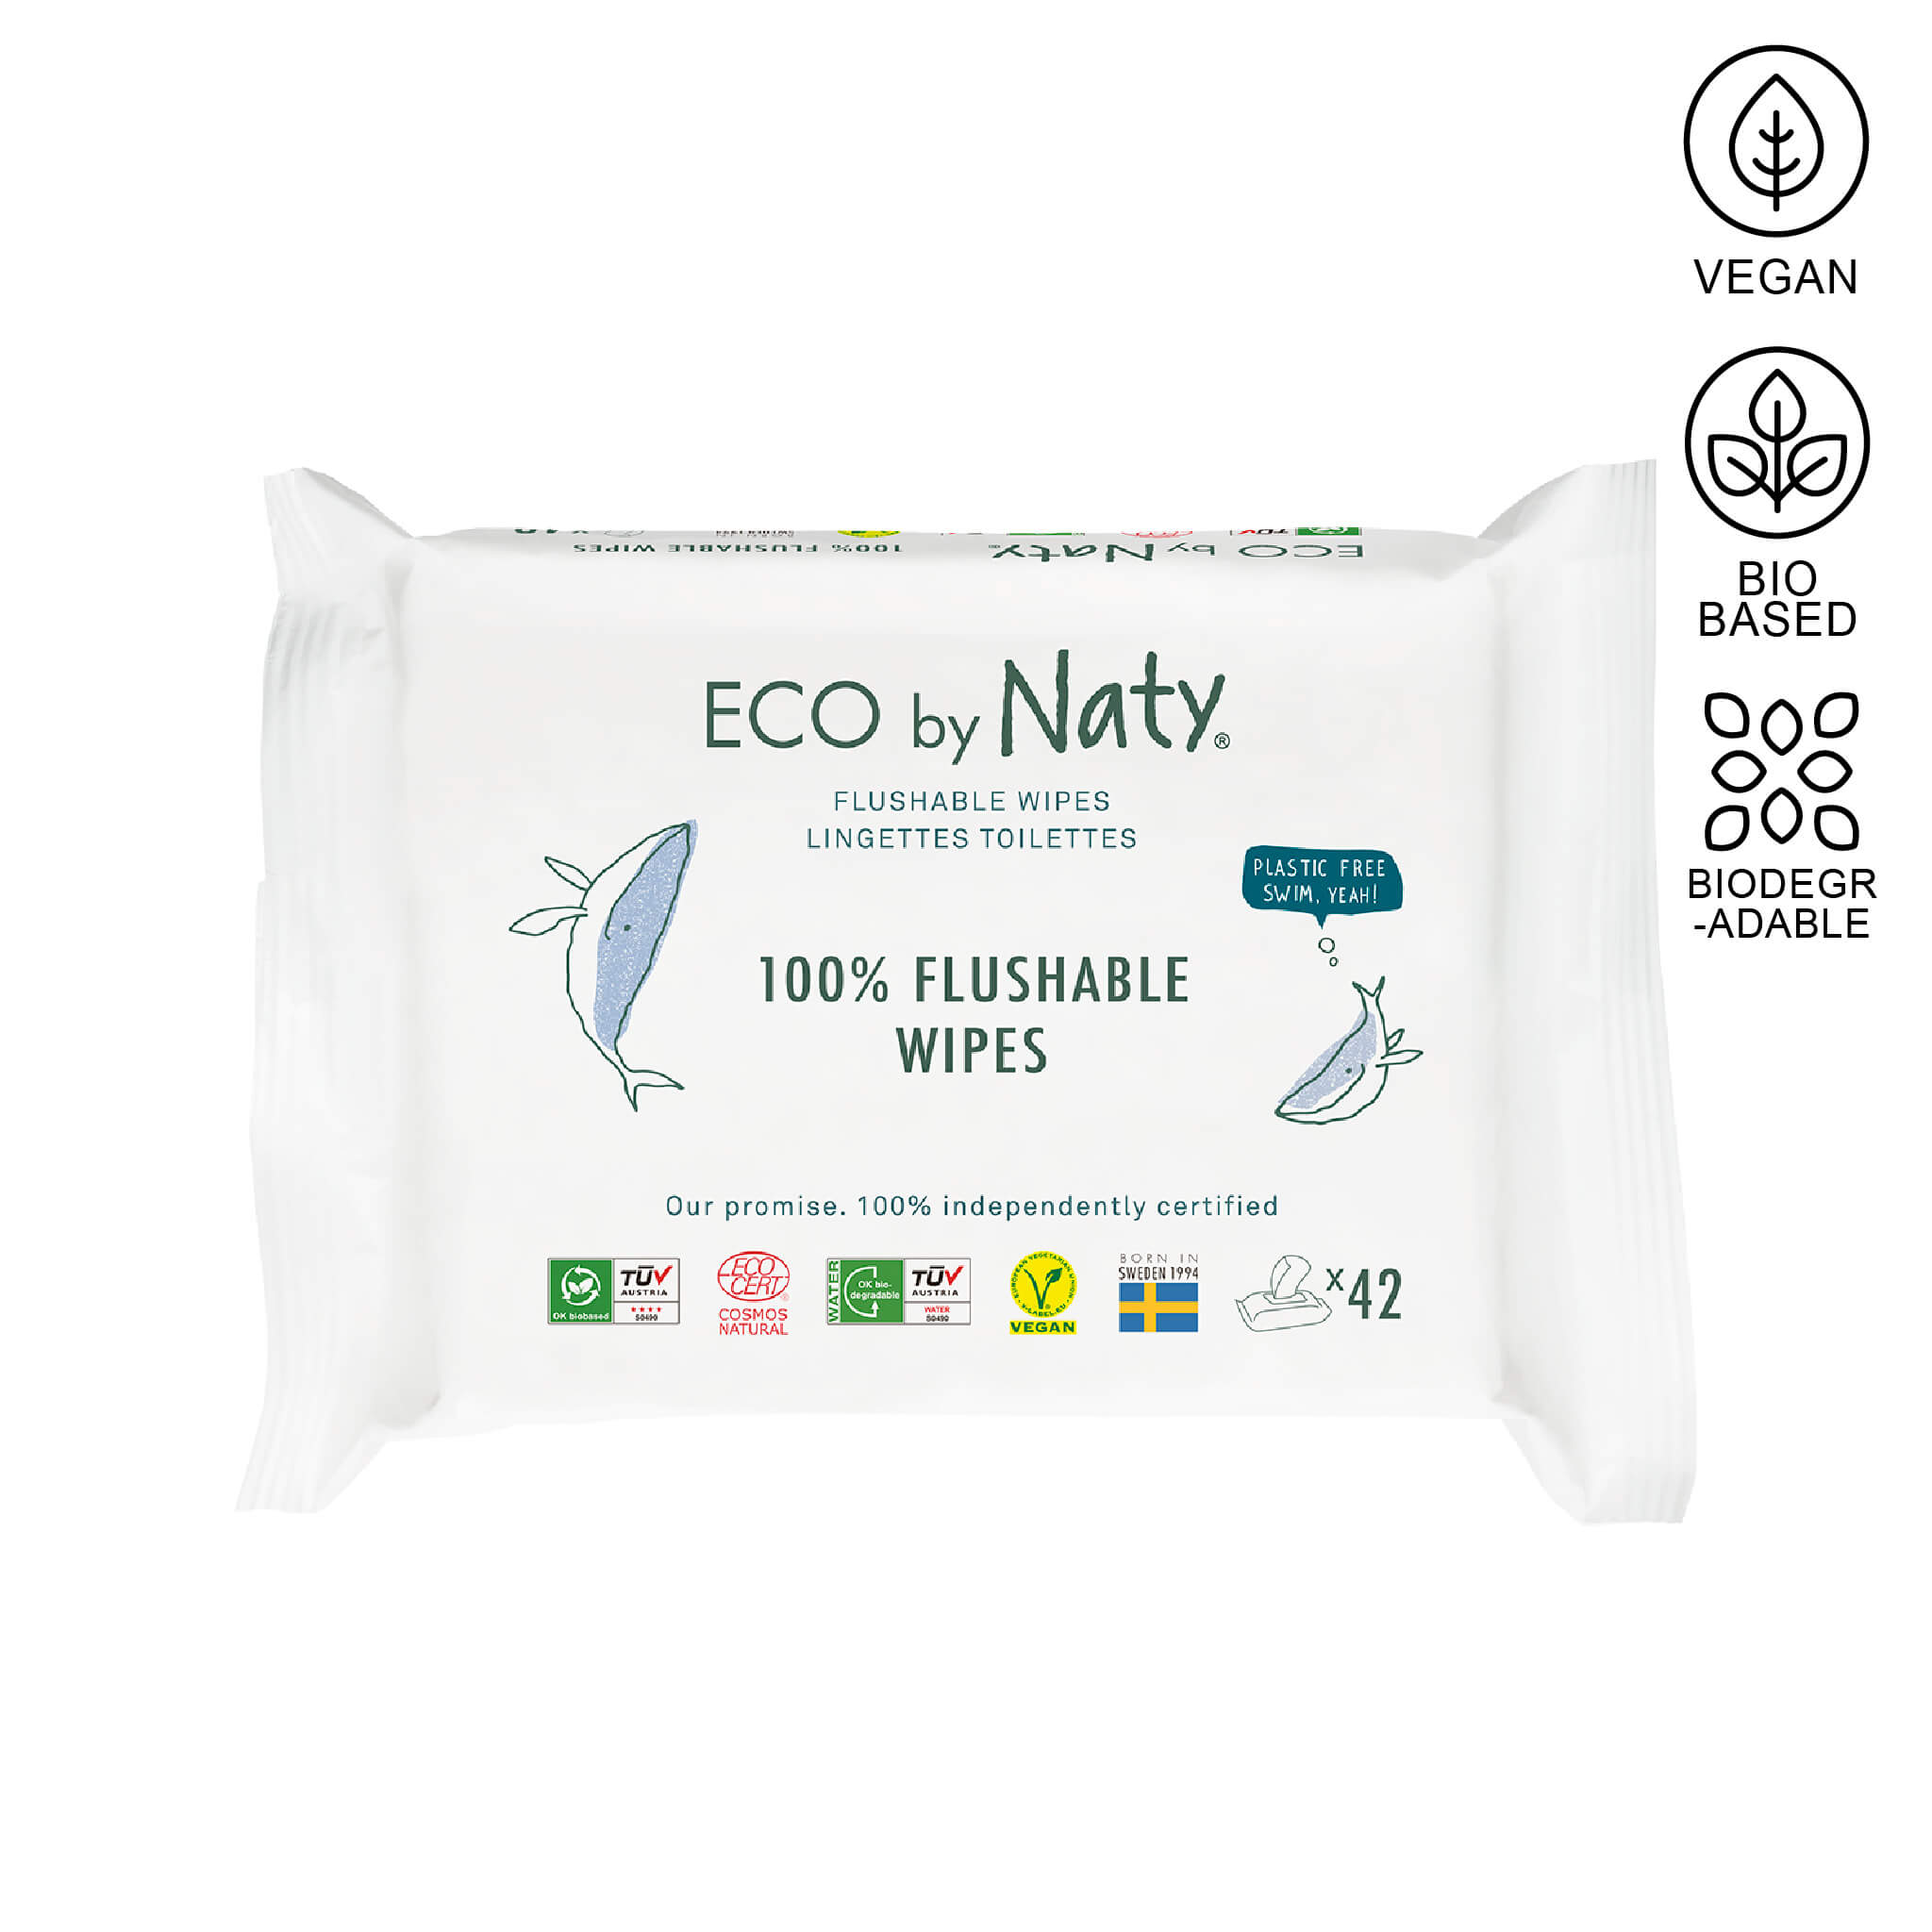 Eco by Naty flushable wipes package containing 42 units.